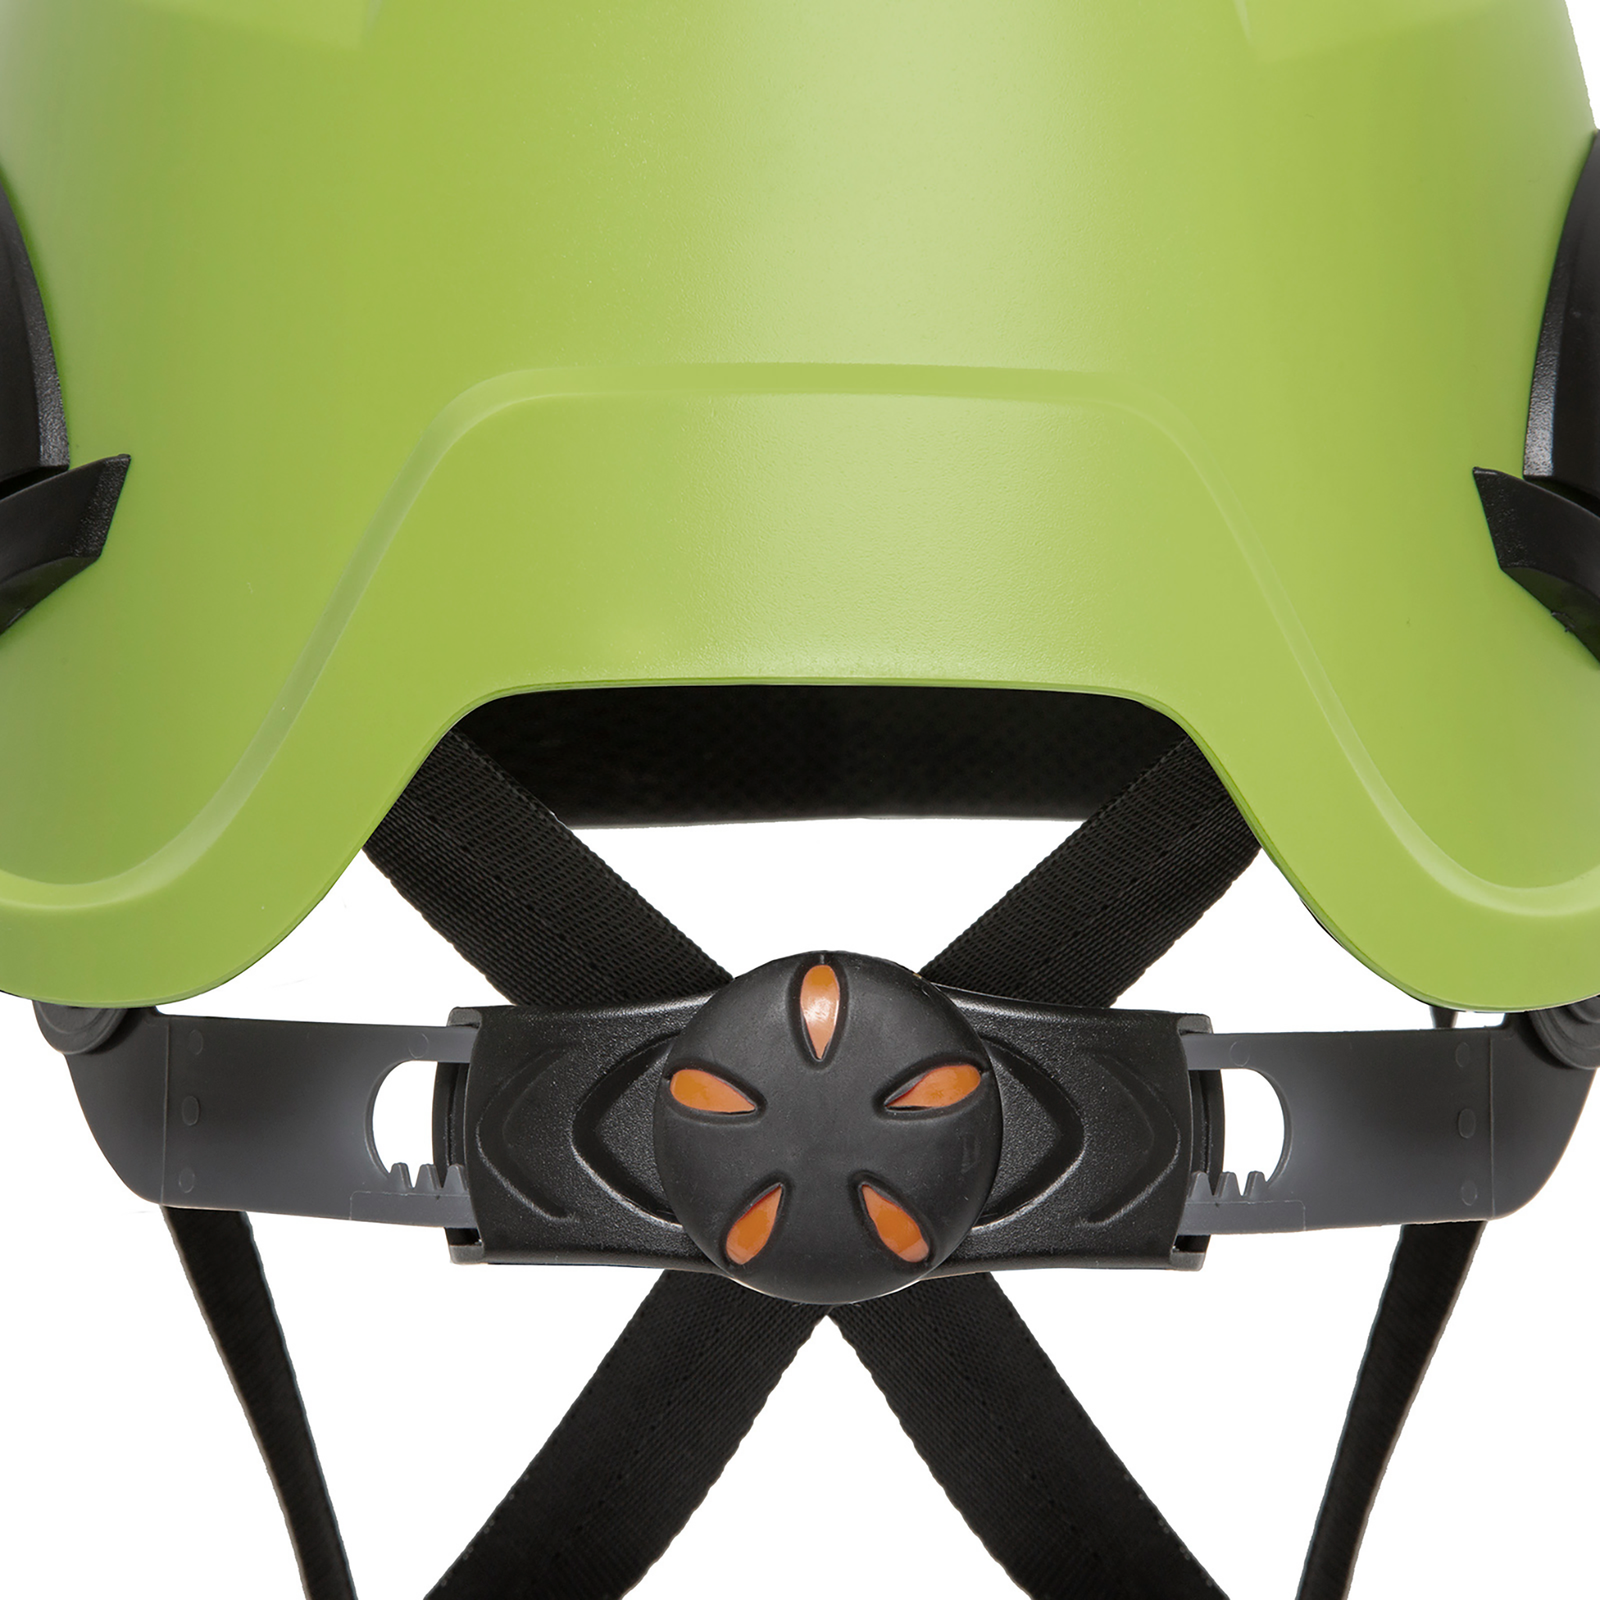 Close up to show the black ratchet adjustment mechanism of the JORESTECH ABS ventilated ANSI compliant hard hat with 4 suspension points